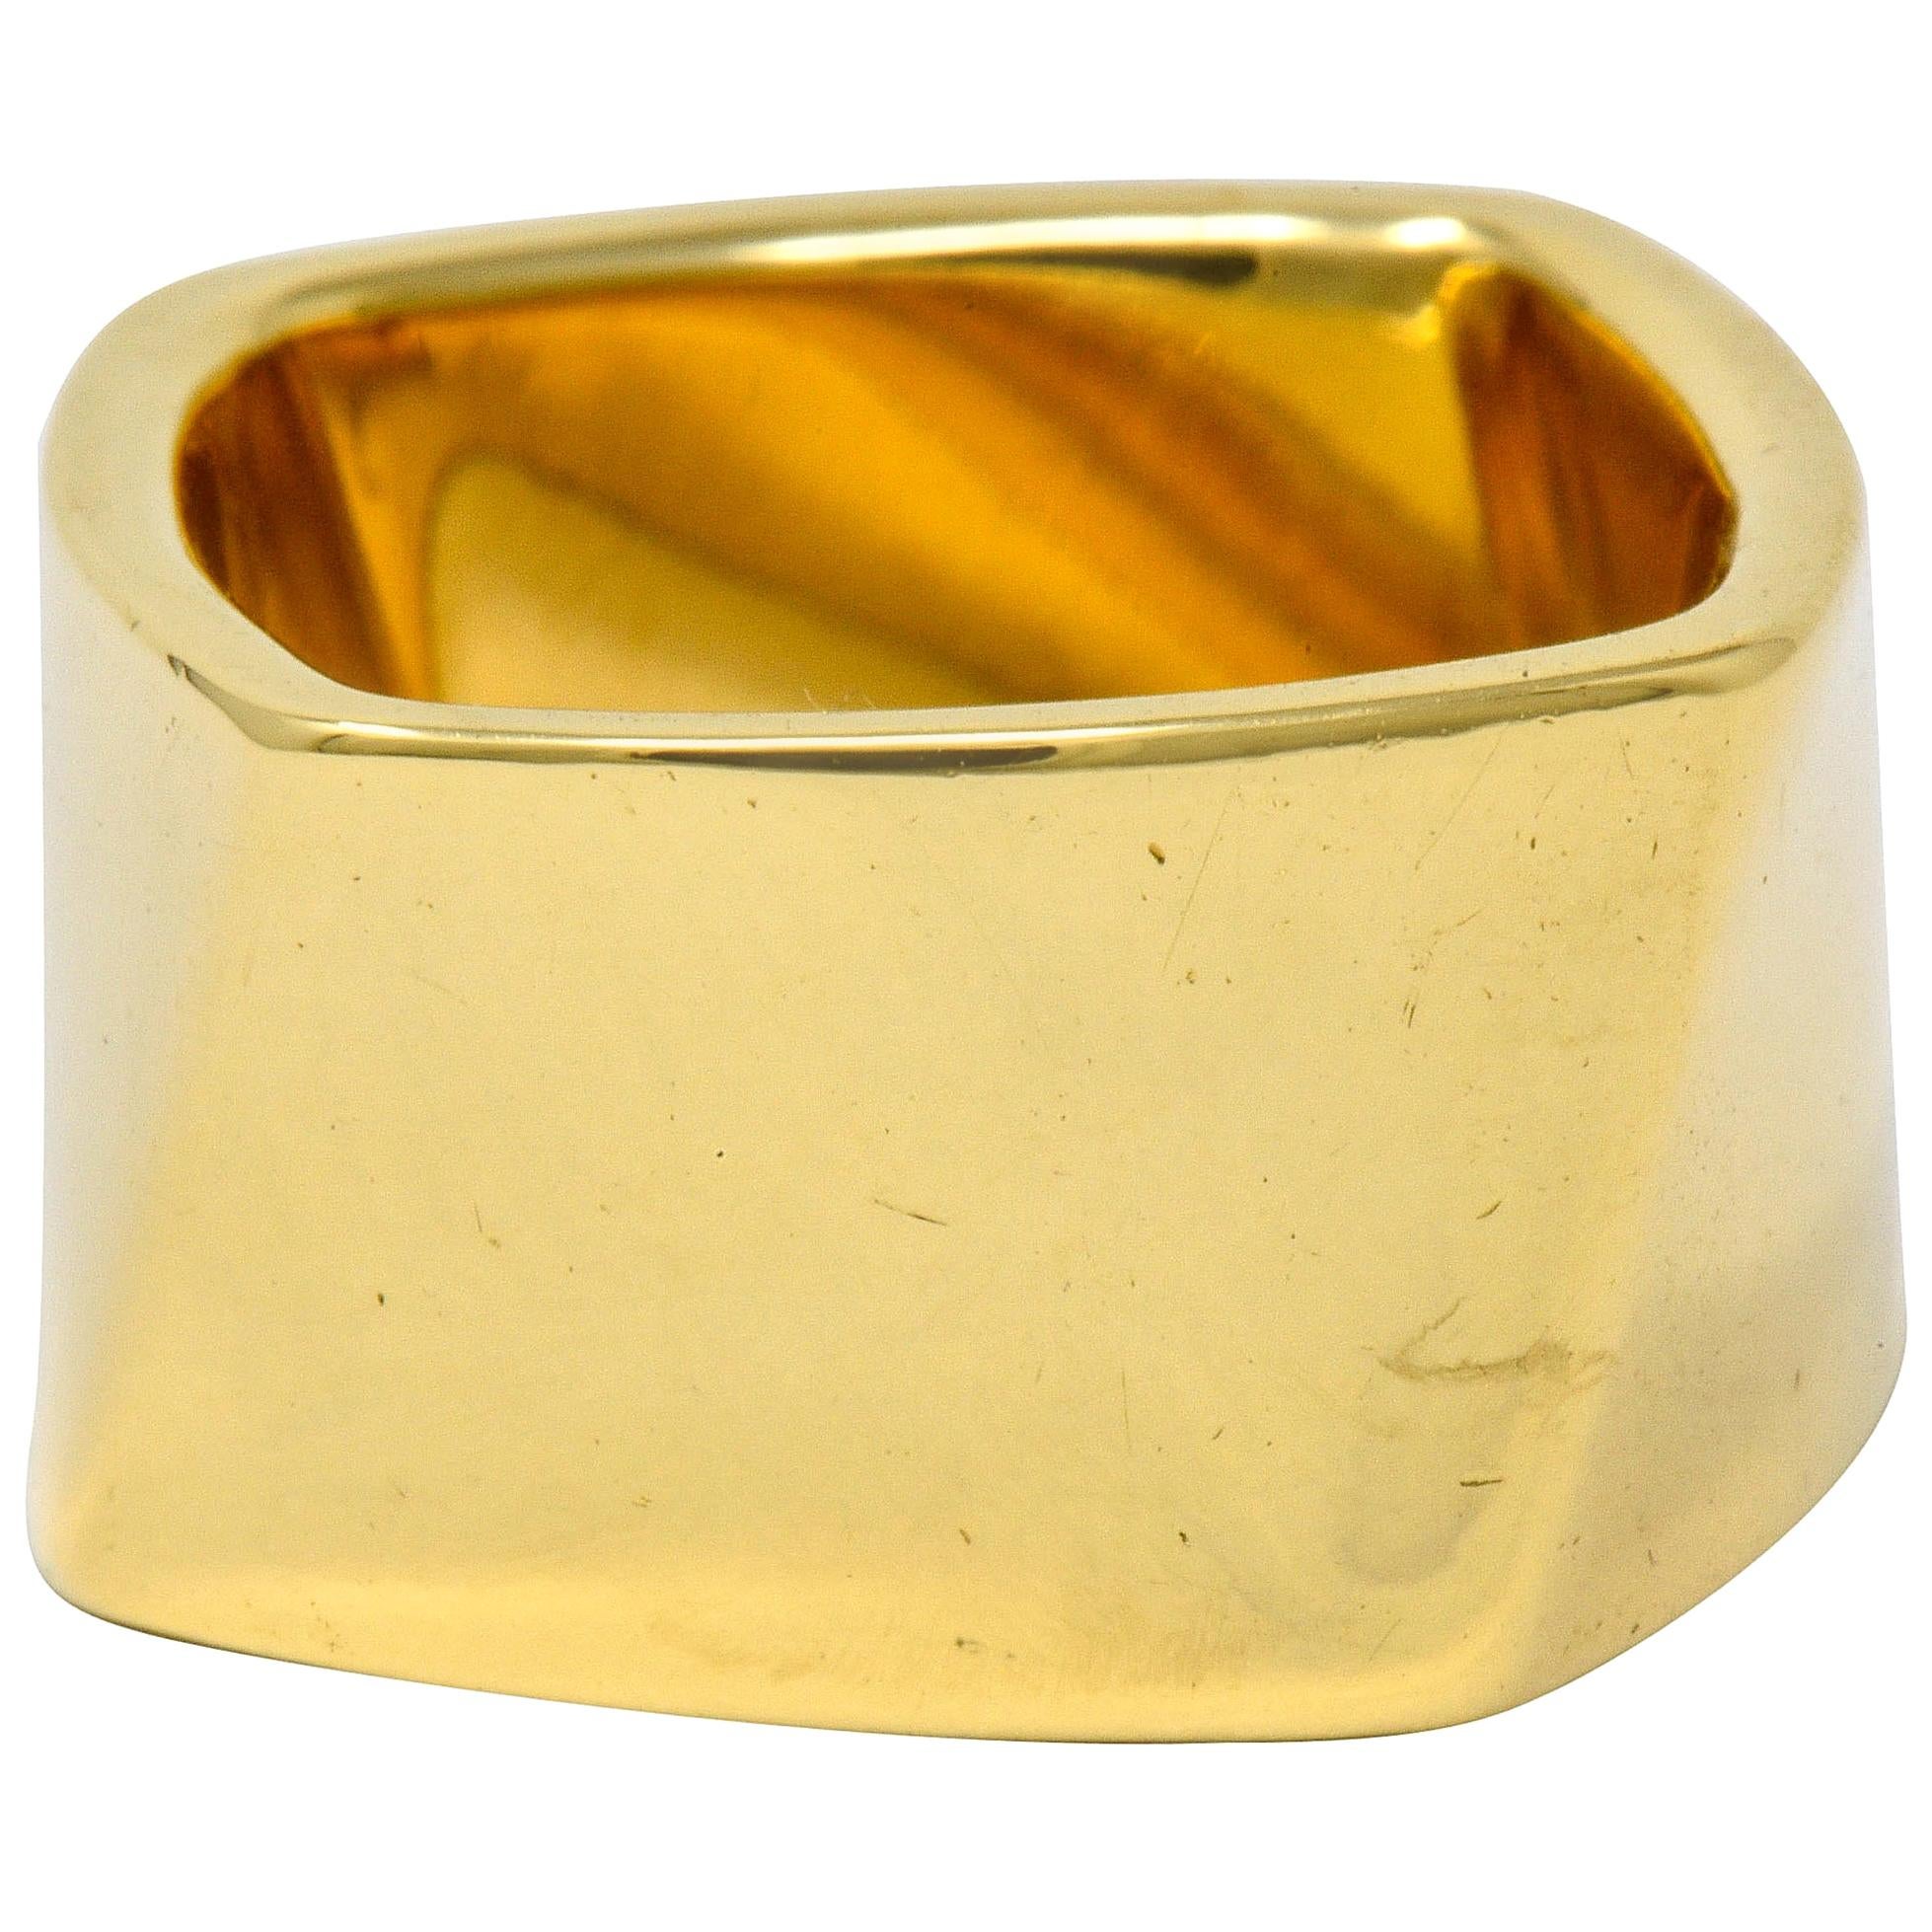 Stylized wide band ring that features a cushion shaped profile

Slightly twisted sides create four dynamic and brightly polished surfaces

Signed T & Co. Gehry

Stamped 750 for 18 karat gold

Circa: 2006

Ring Size: 6 3/4 & not sizable

Measures: